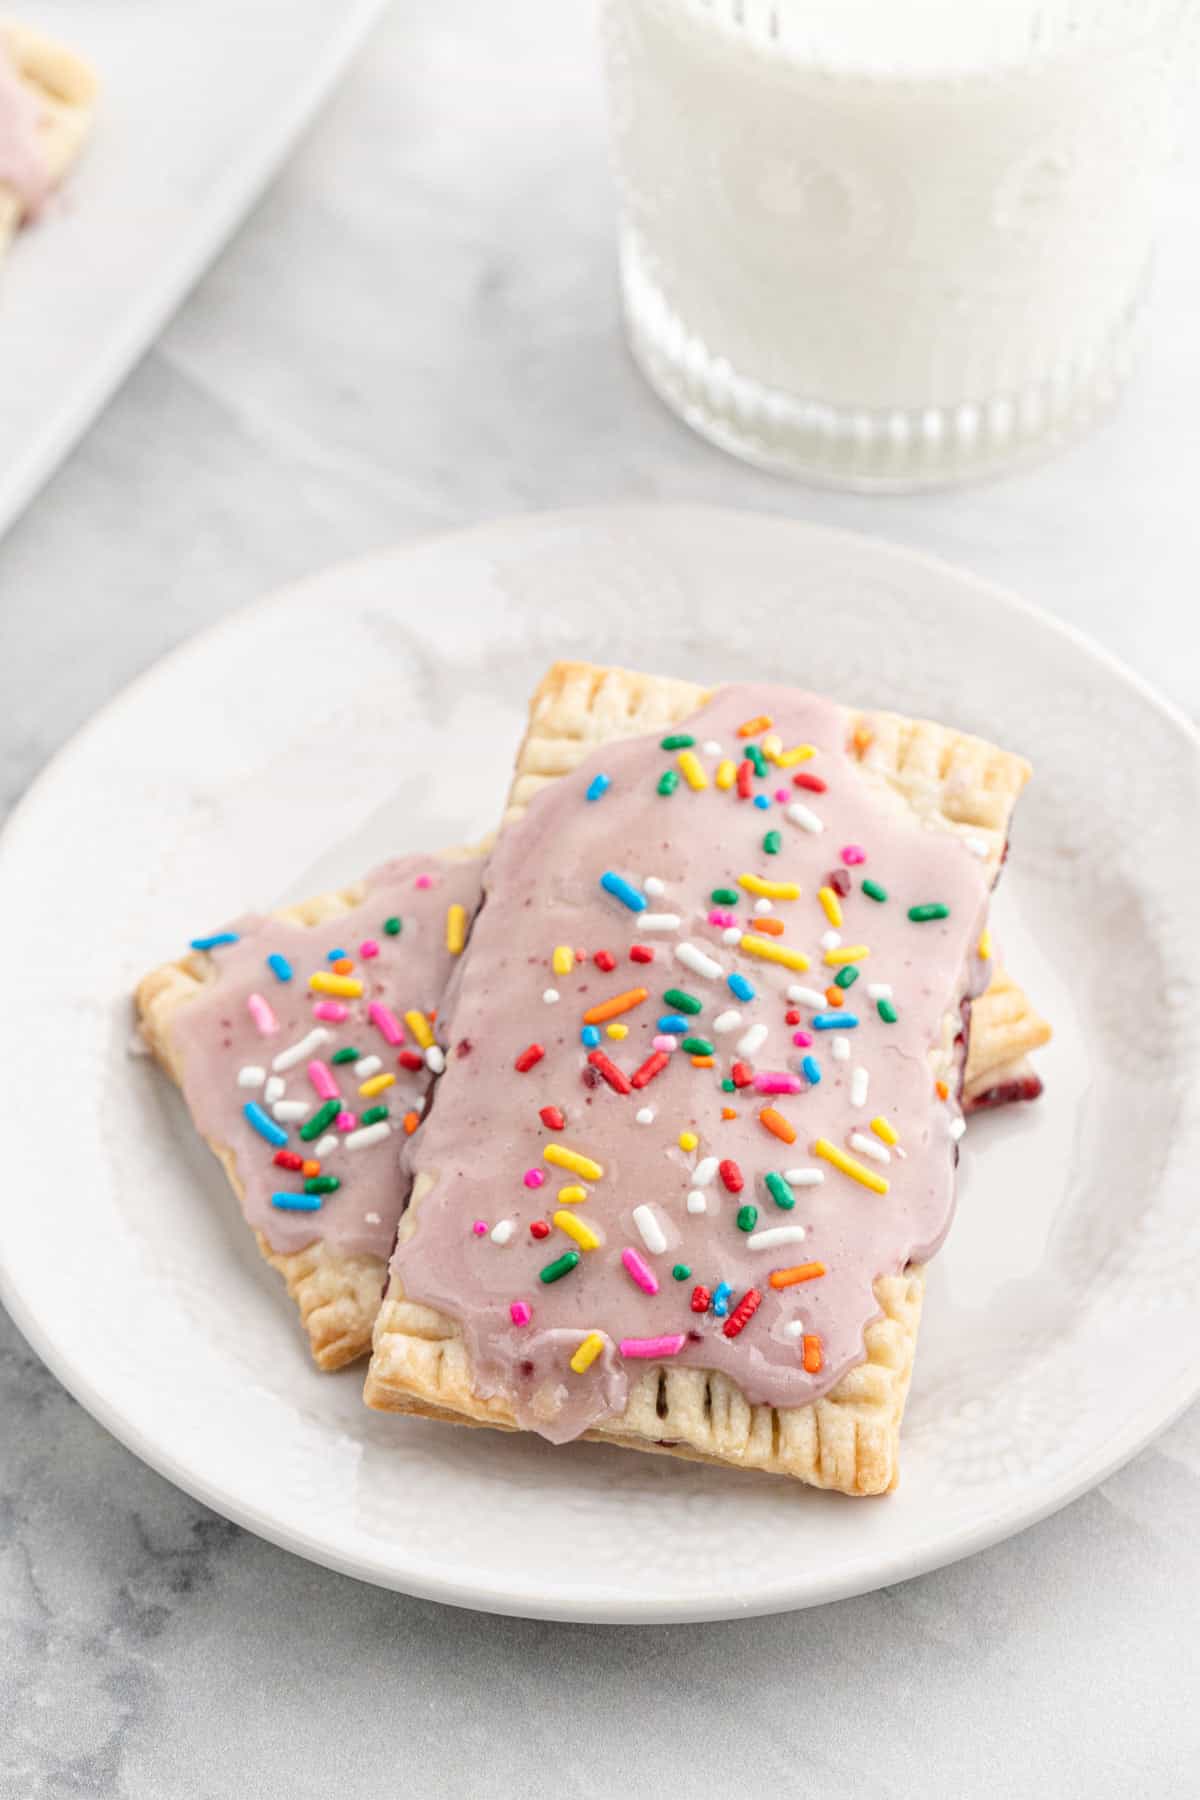 Homemade Pop Tarts 2 - 25 Recipes to Cook and Bake With Kids (Kid Friendly Recipes)